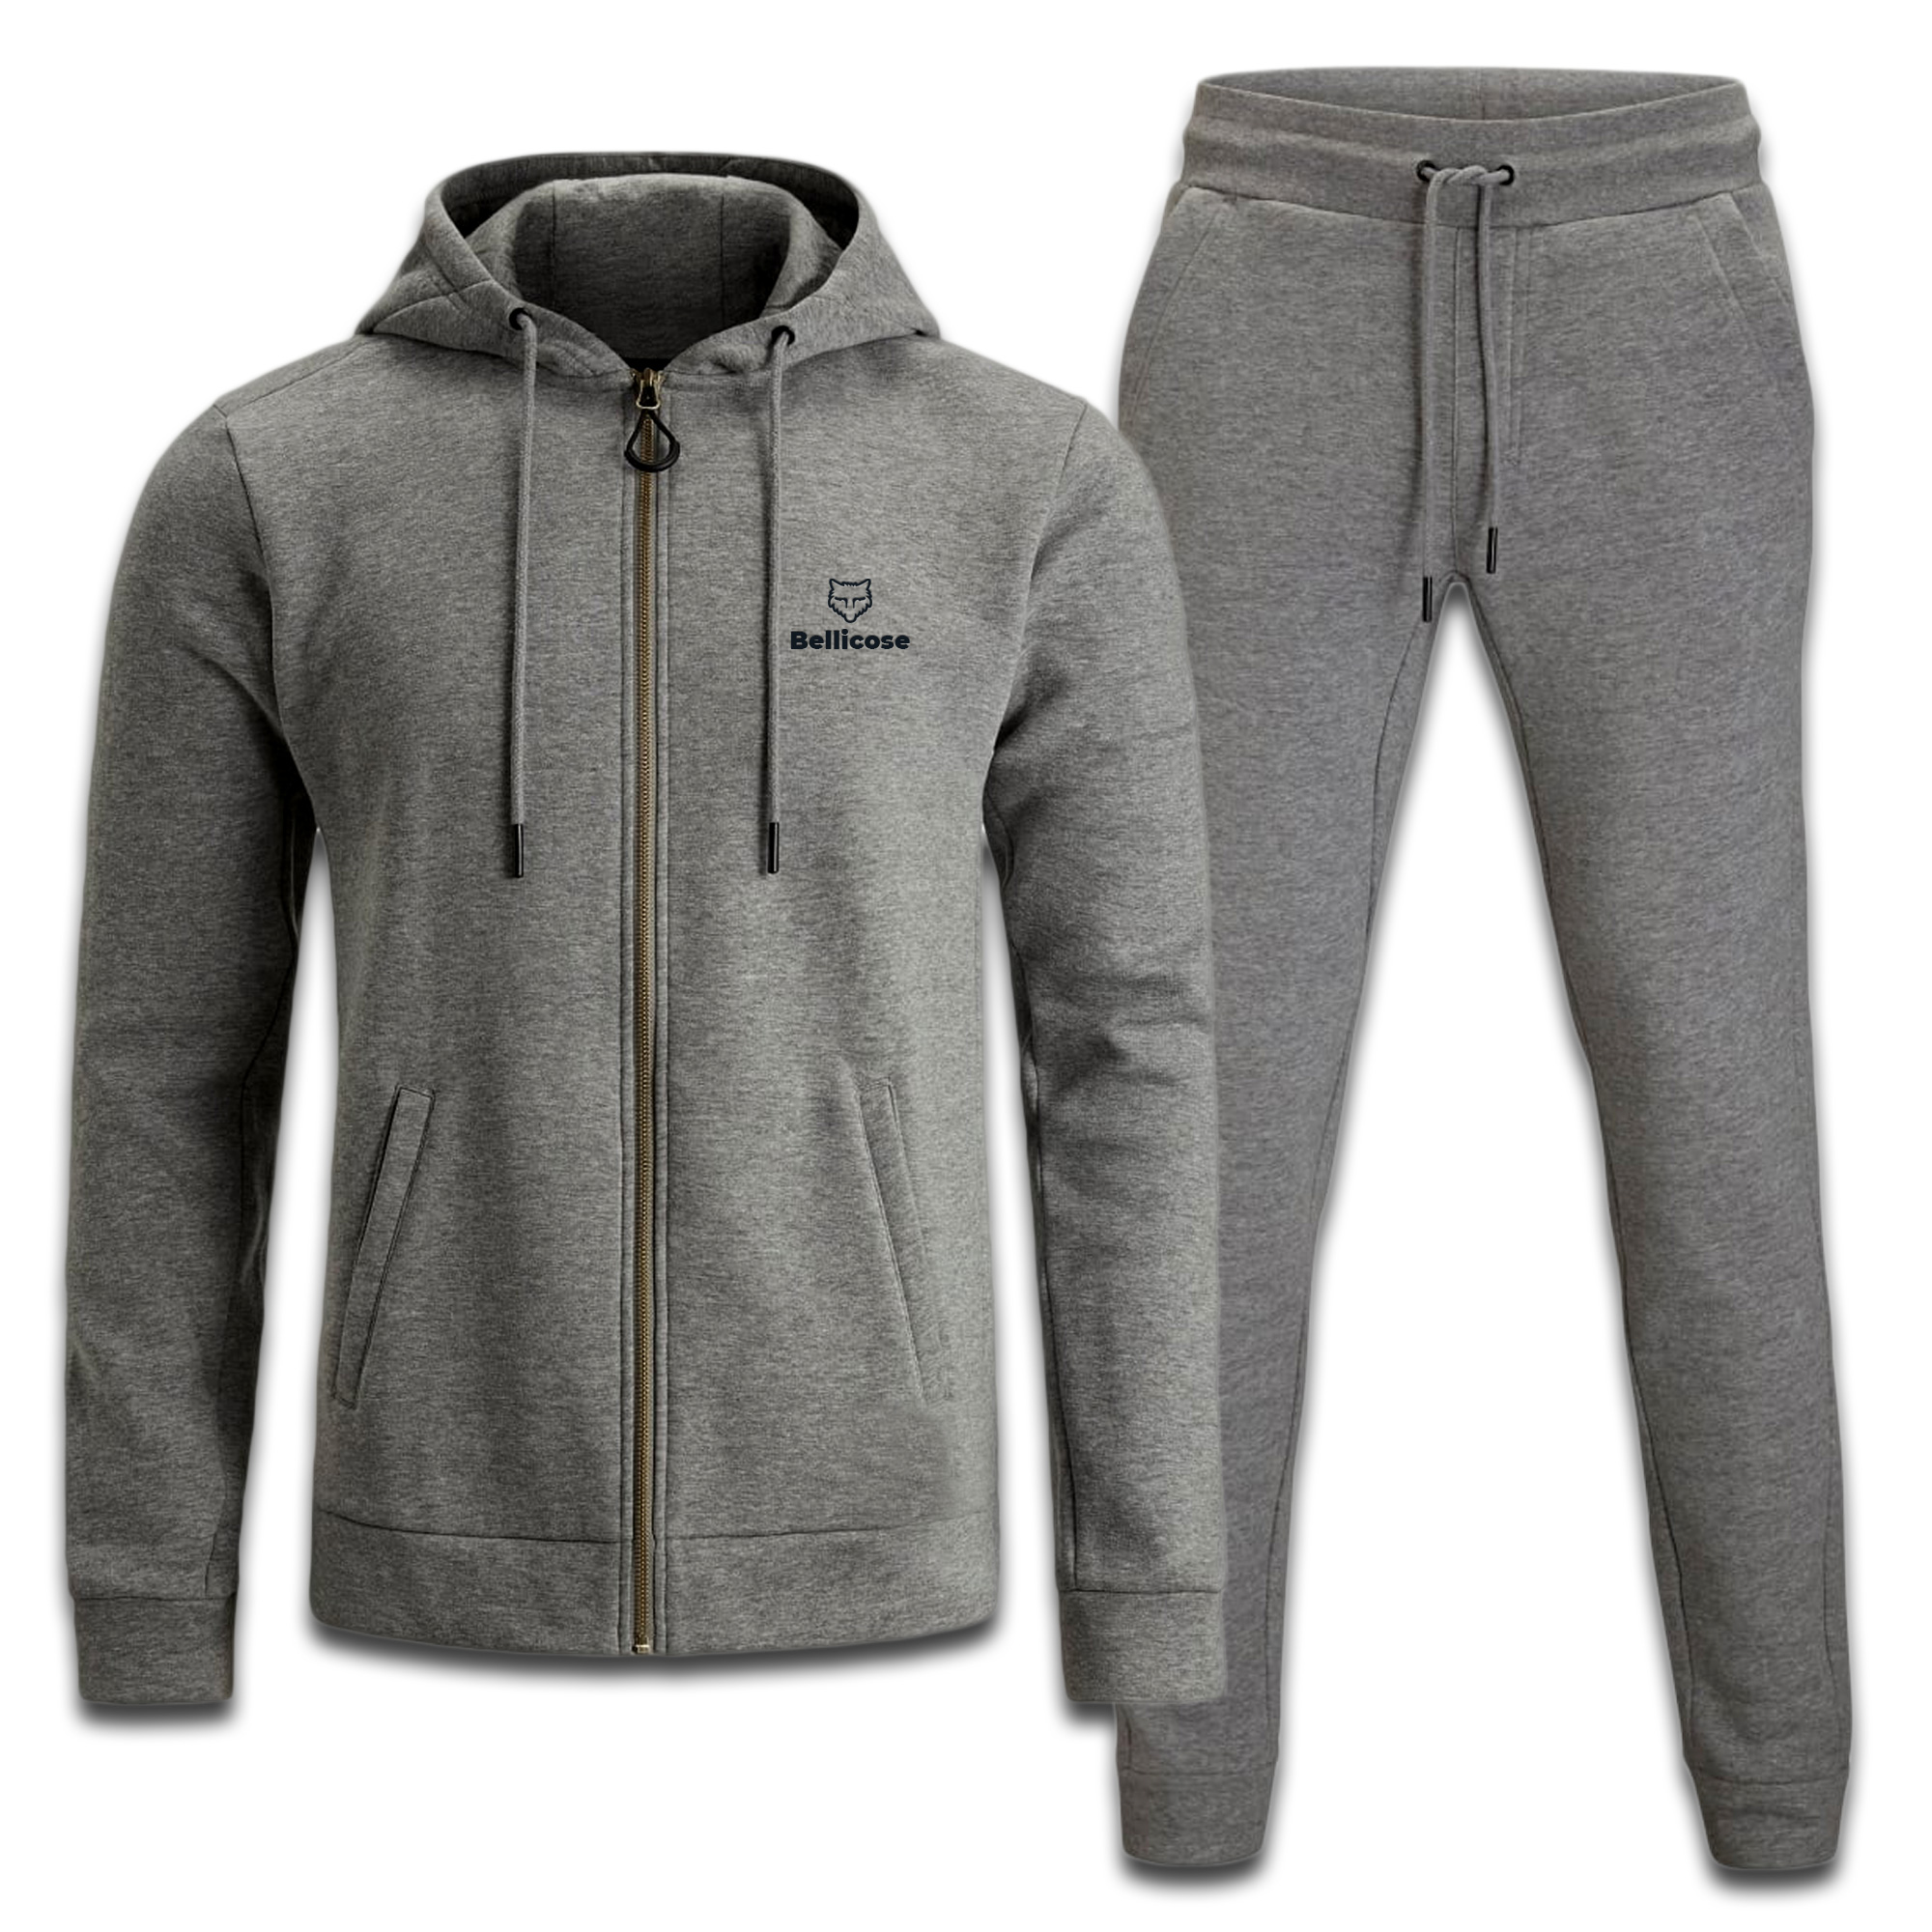 Mens Sports Fleece Tracksuit Set with Fleece Hooded Top The Bellicose